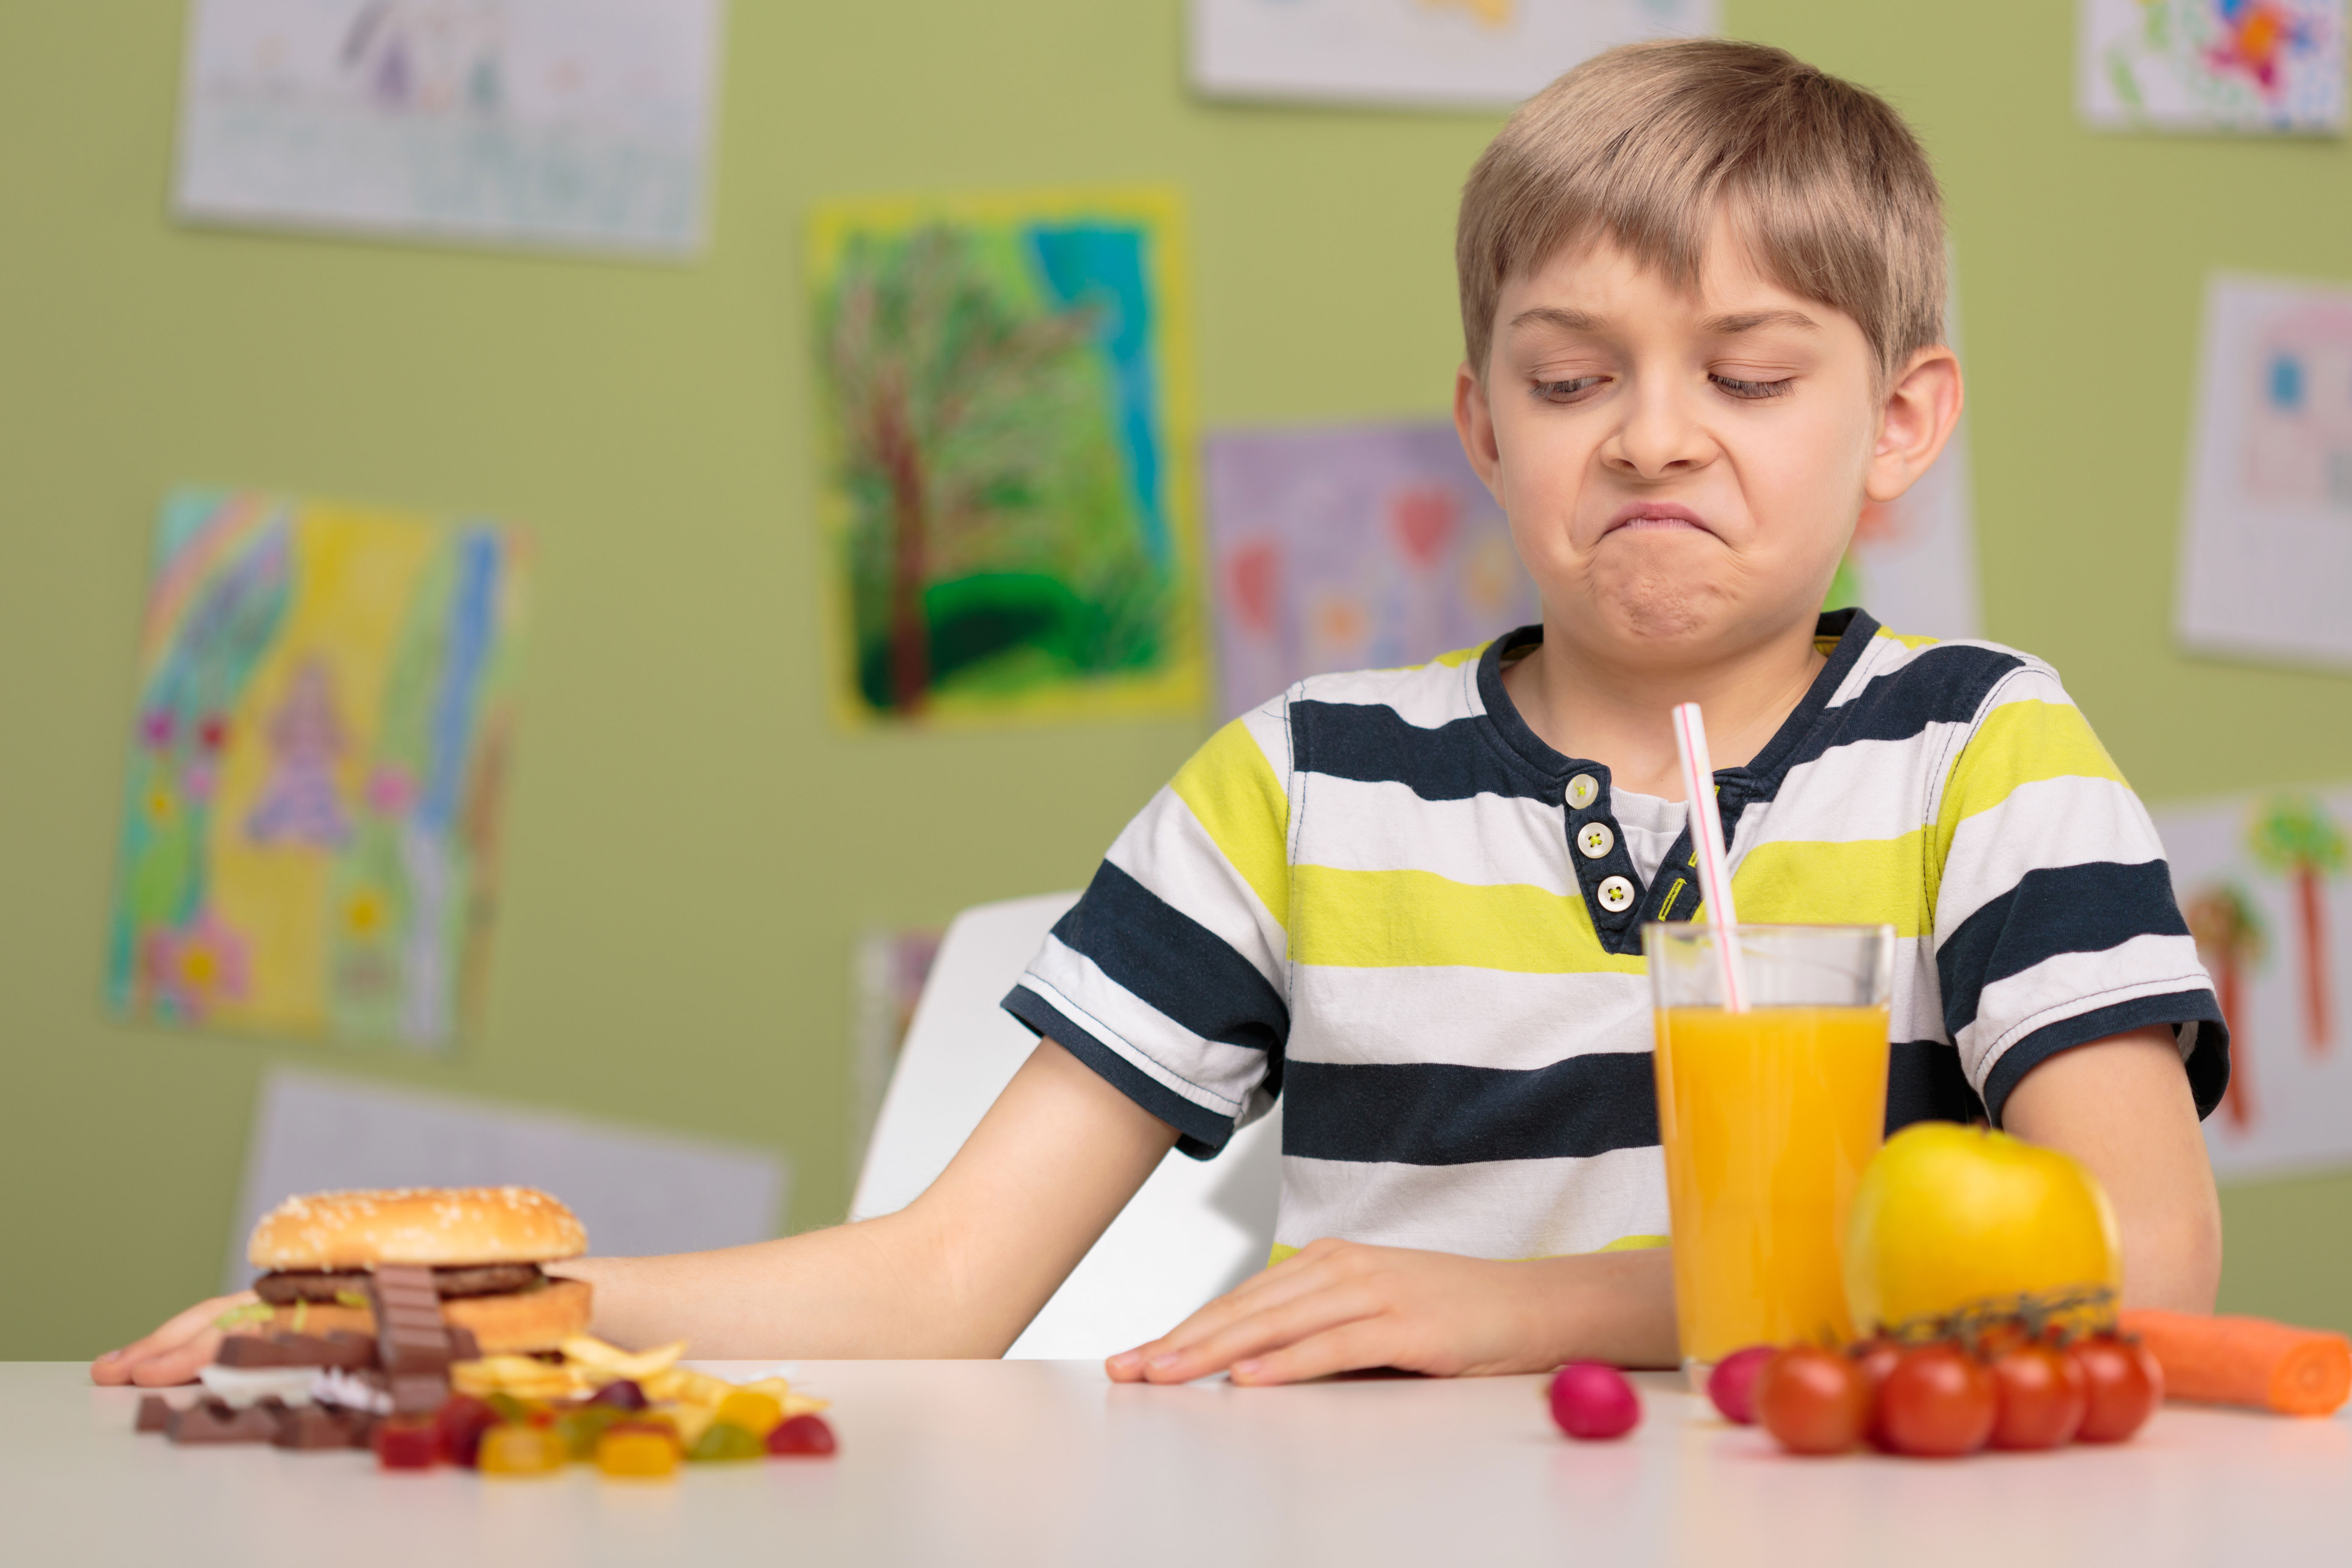 Worried about your child’s eating habits? Act Now!